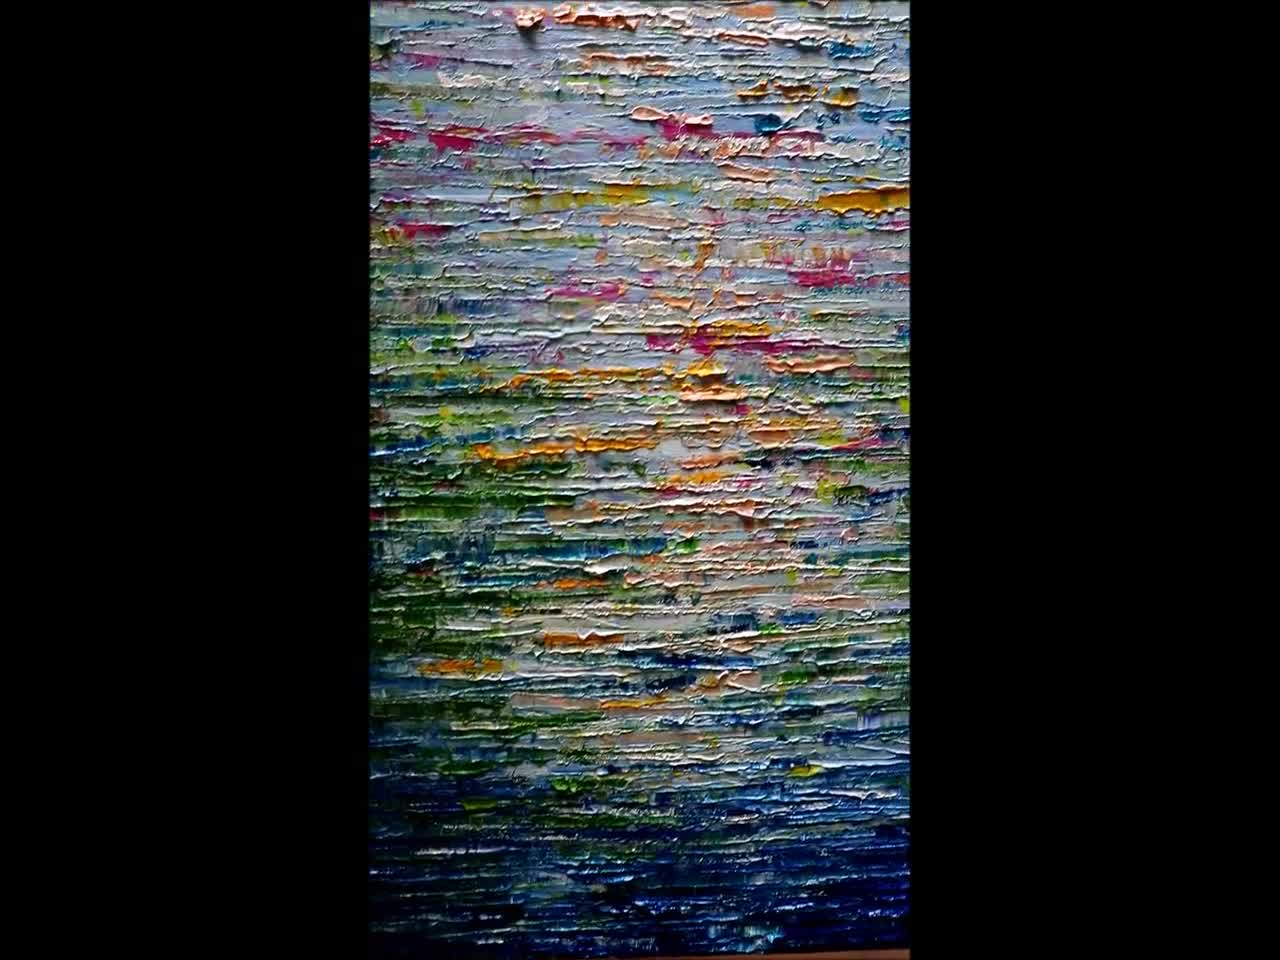 WATER MIST OCEAN Abstract Square Painting on Large Canvas Hand-painted  Modern Wall Art